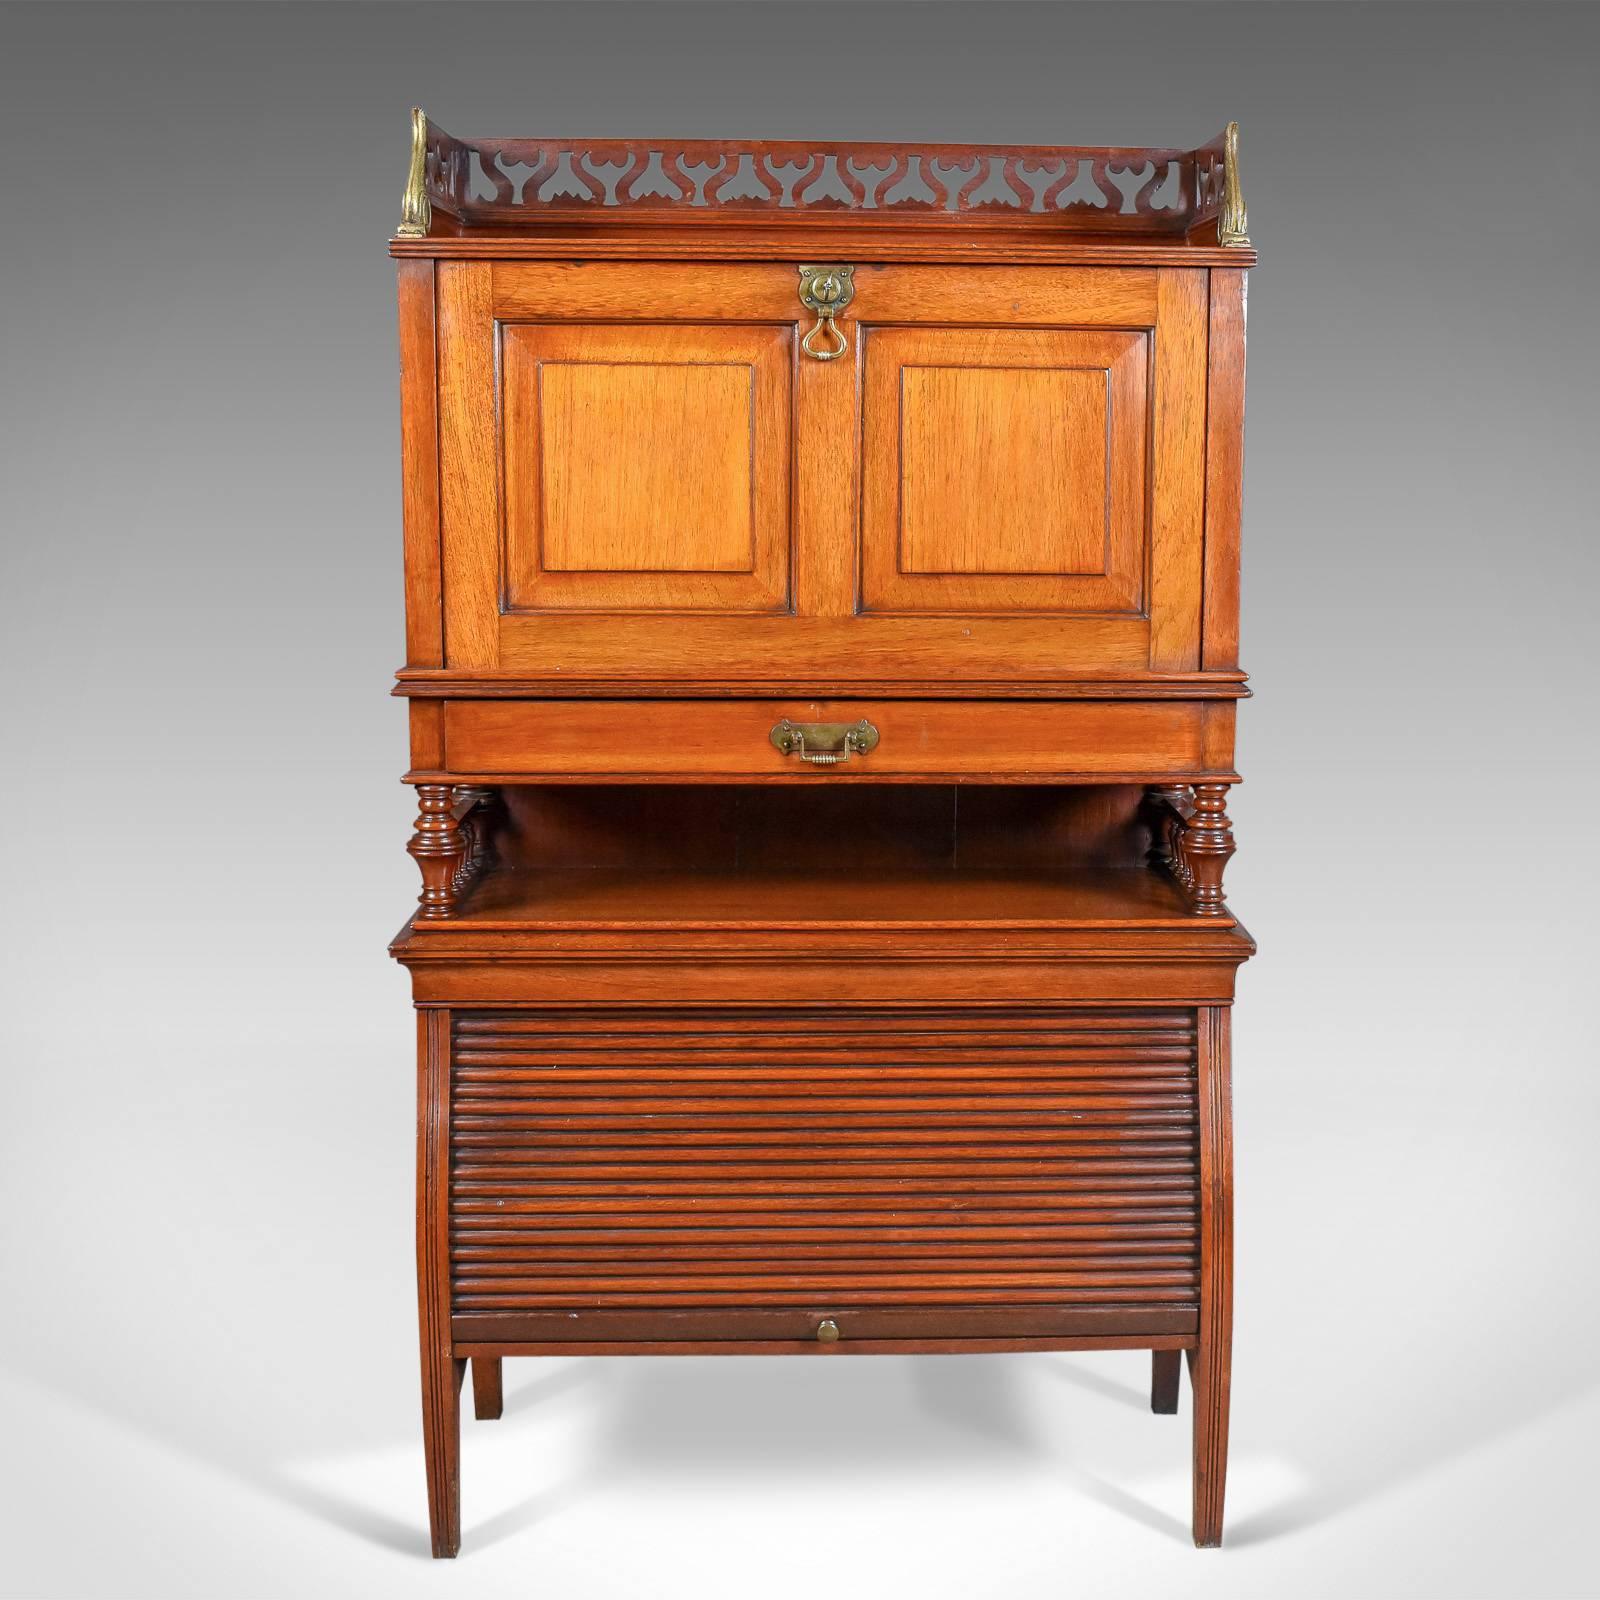 This is an antique bureau cabinet, an English, Edwardian, walnut cupboard dating to, circa 1910.

A craftsman's piece in solid walnut
Delightful coloration and desirable aged patina
Of good proportion and practical use.

Standing upon square